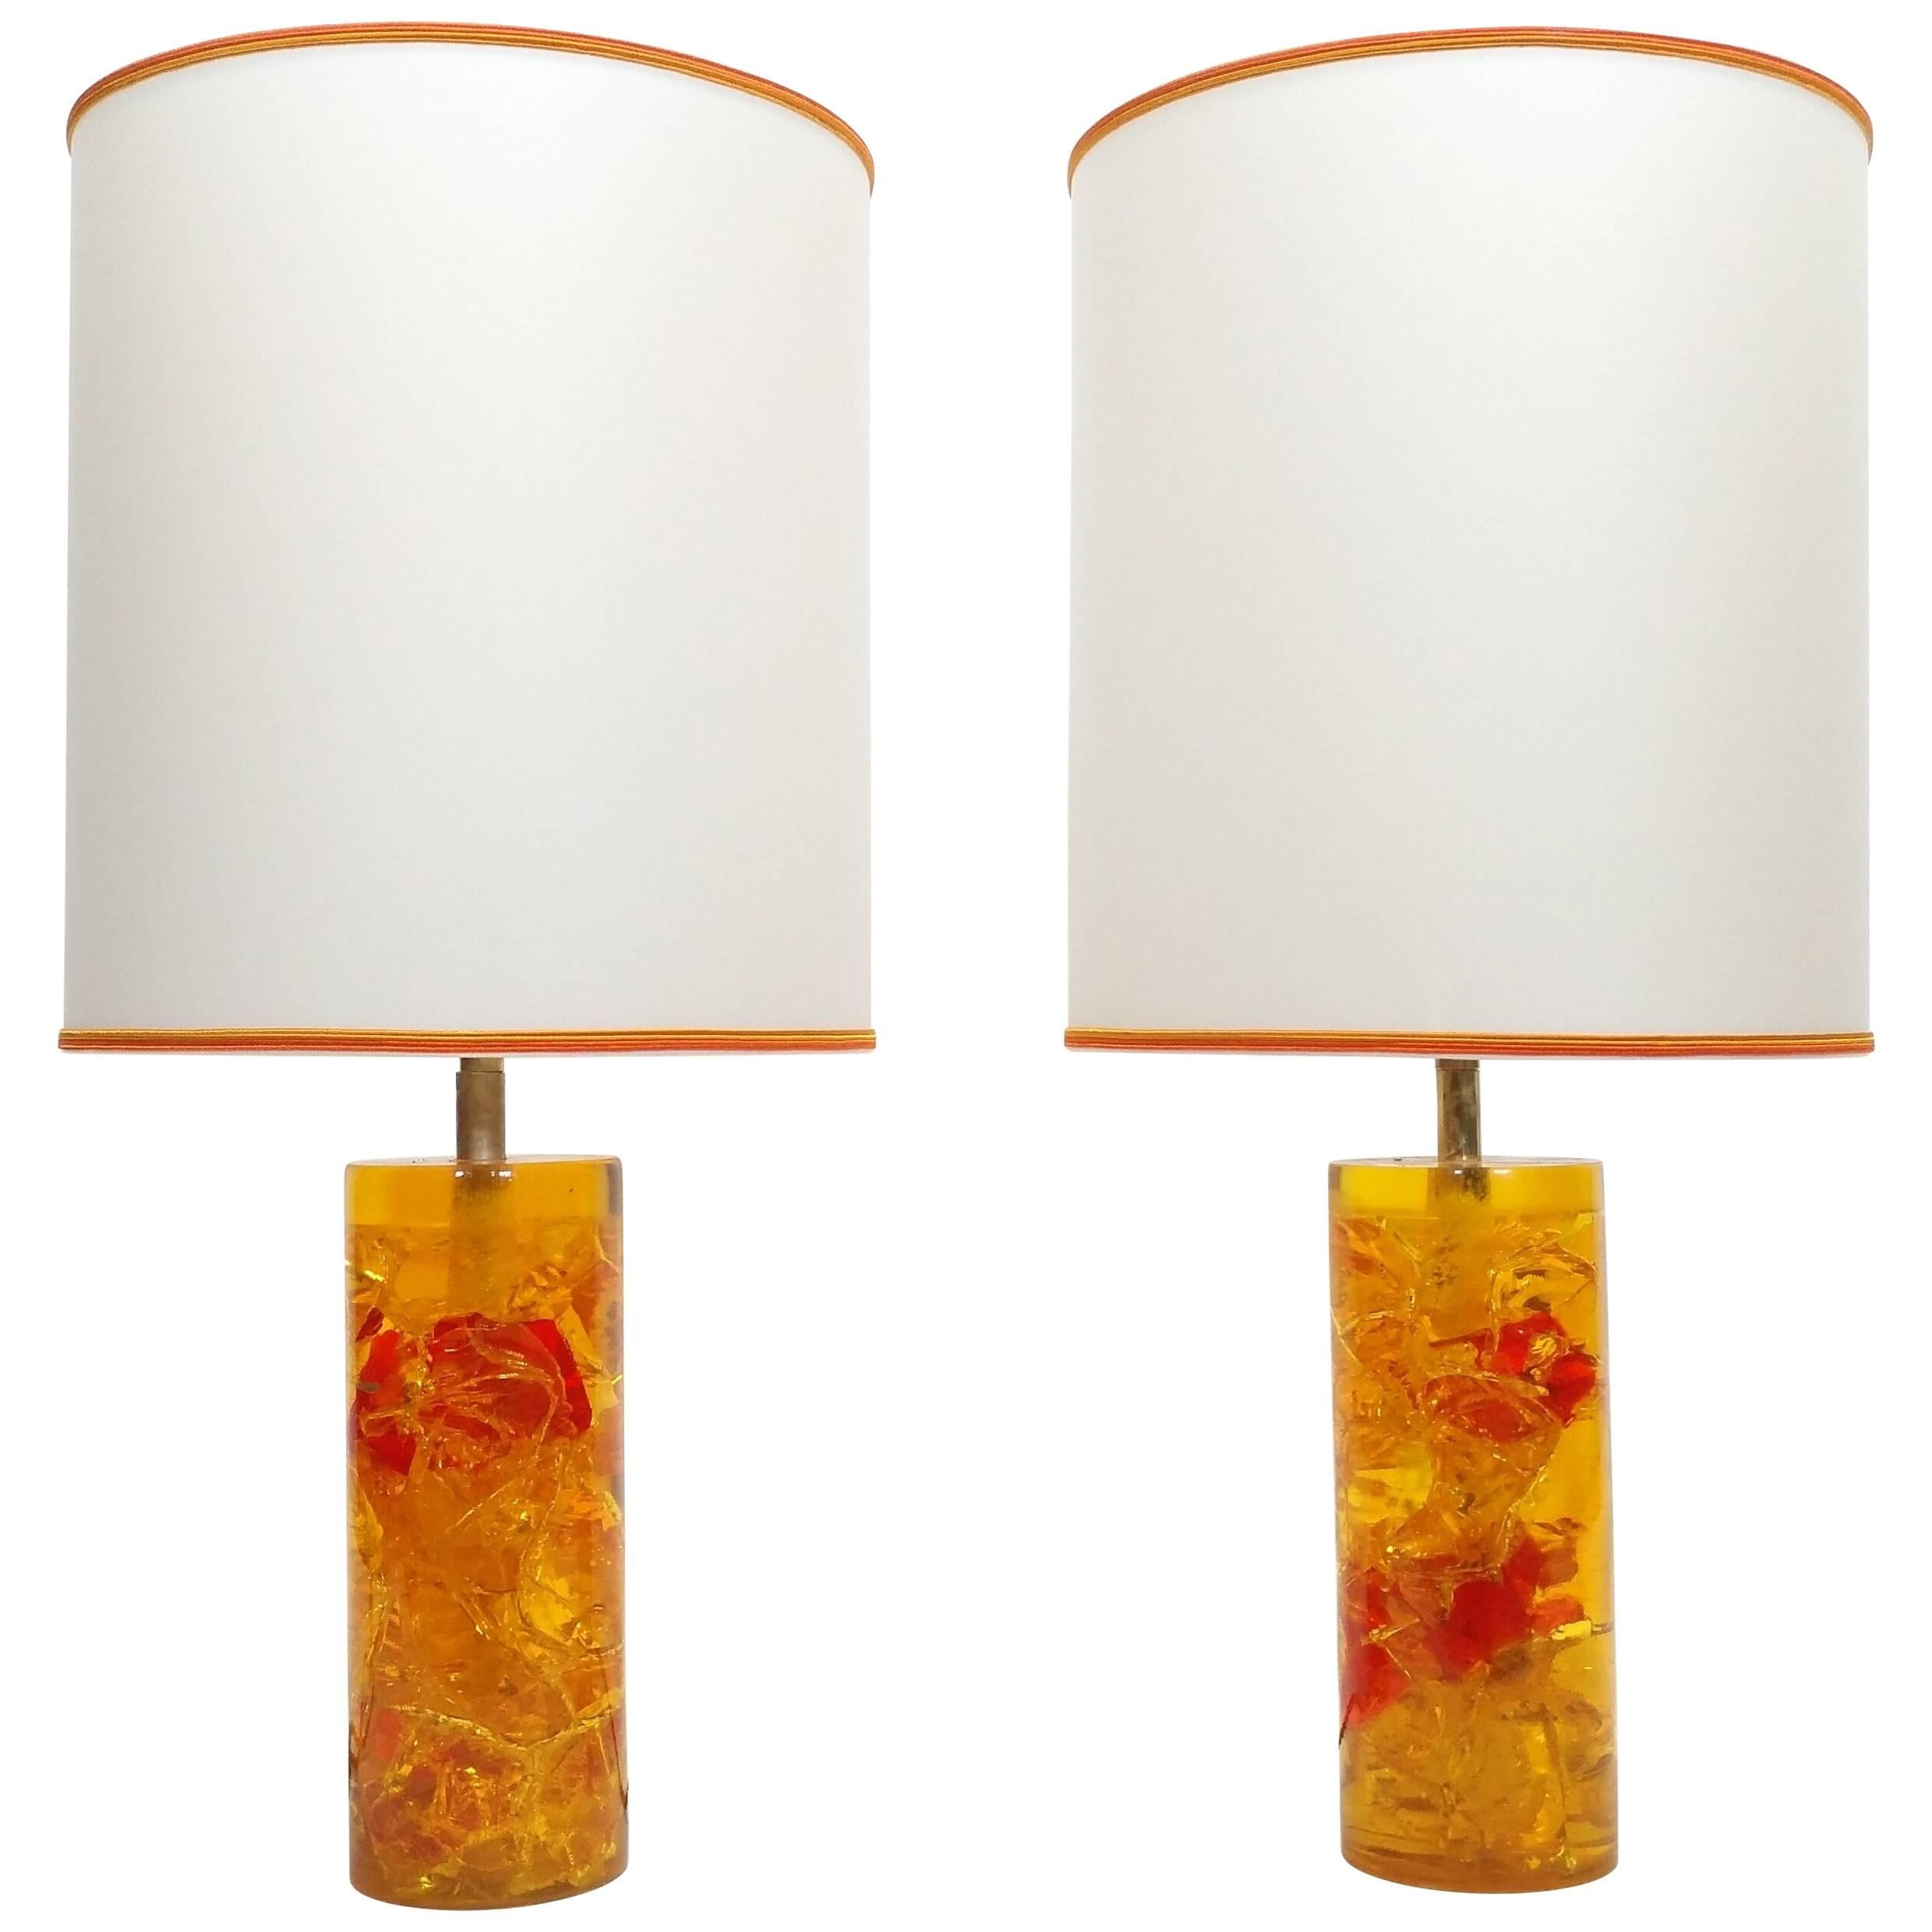 Pair of Table Lamps in Fractal Resin, France, 1970 For Sale